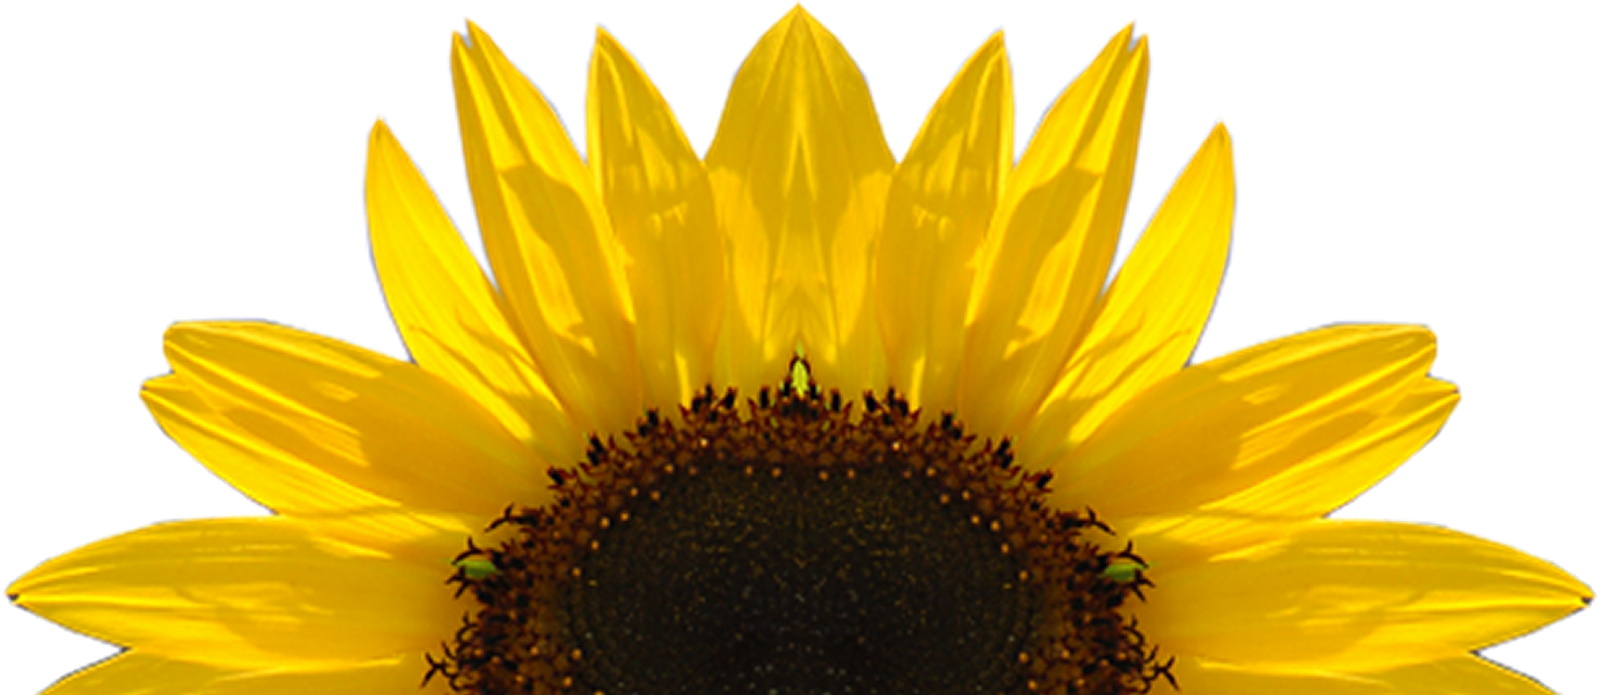 Sunflower Free Sunflower Clipart Half Pencil And In - Key Cutting Board Kess Inhouse (1600x695)